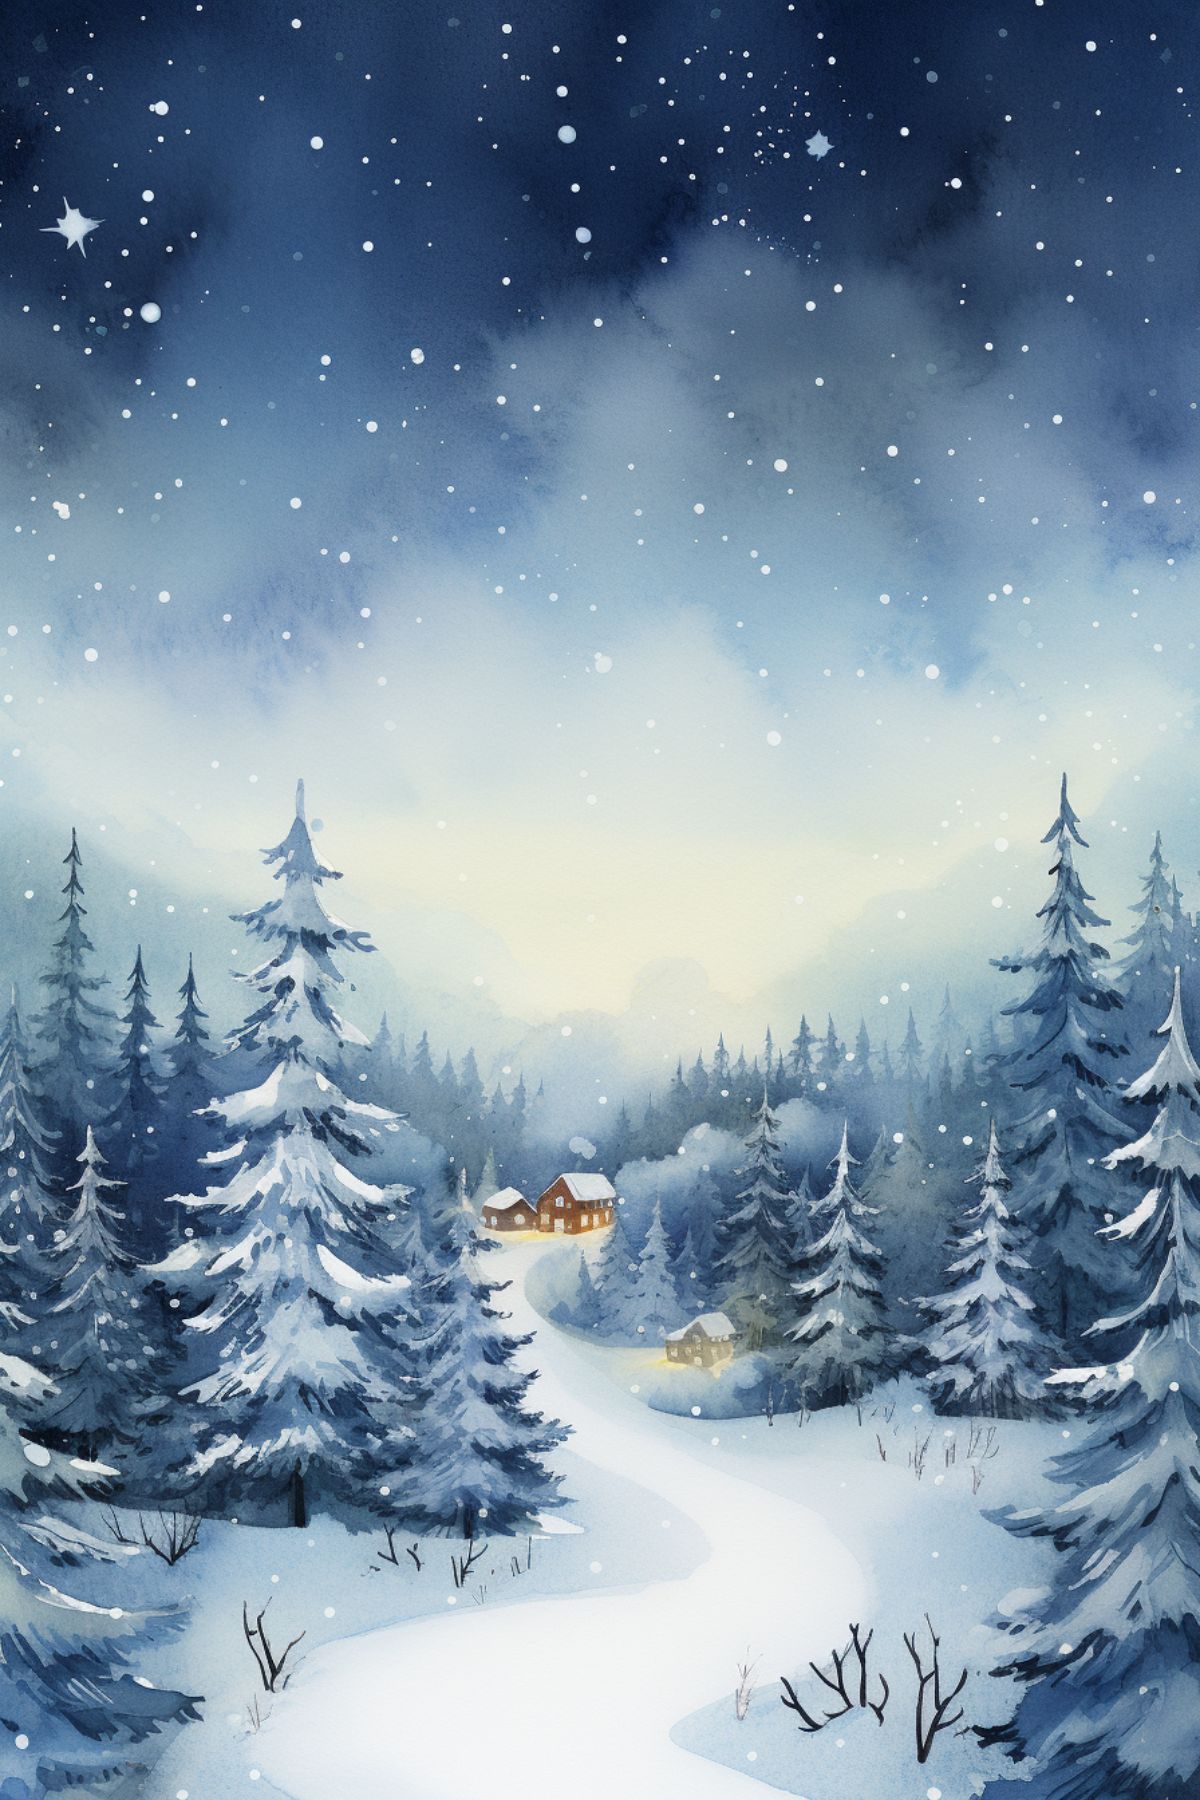 watercolor scene of pine trees and cabin covered in snow for christmas, blues and whites